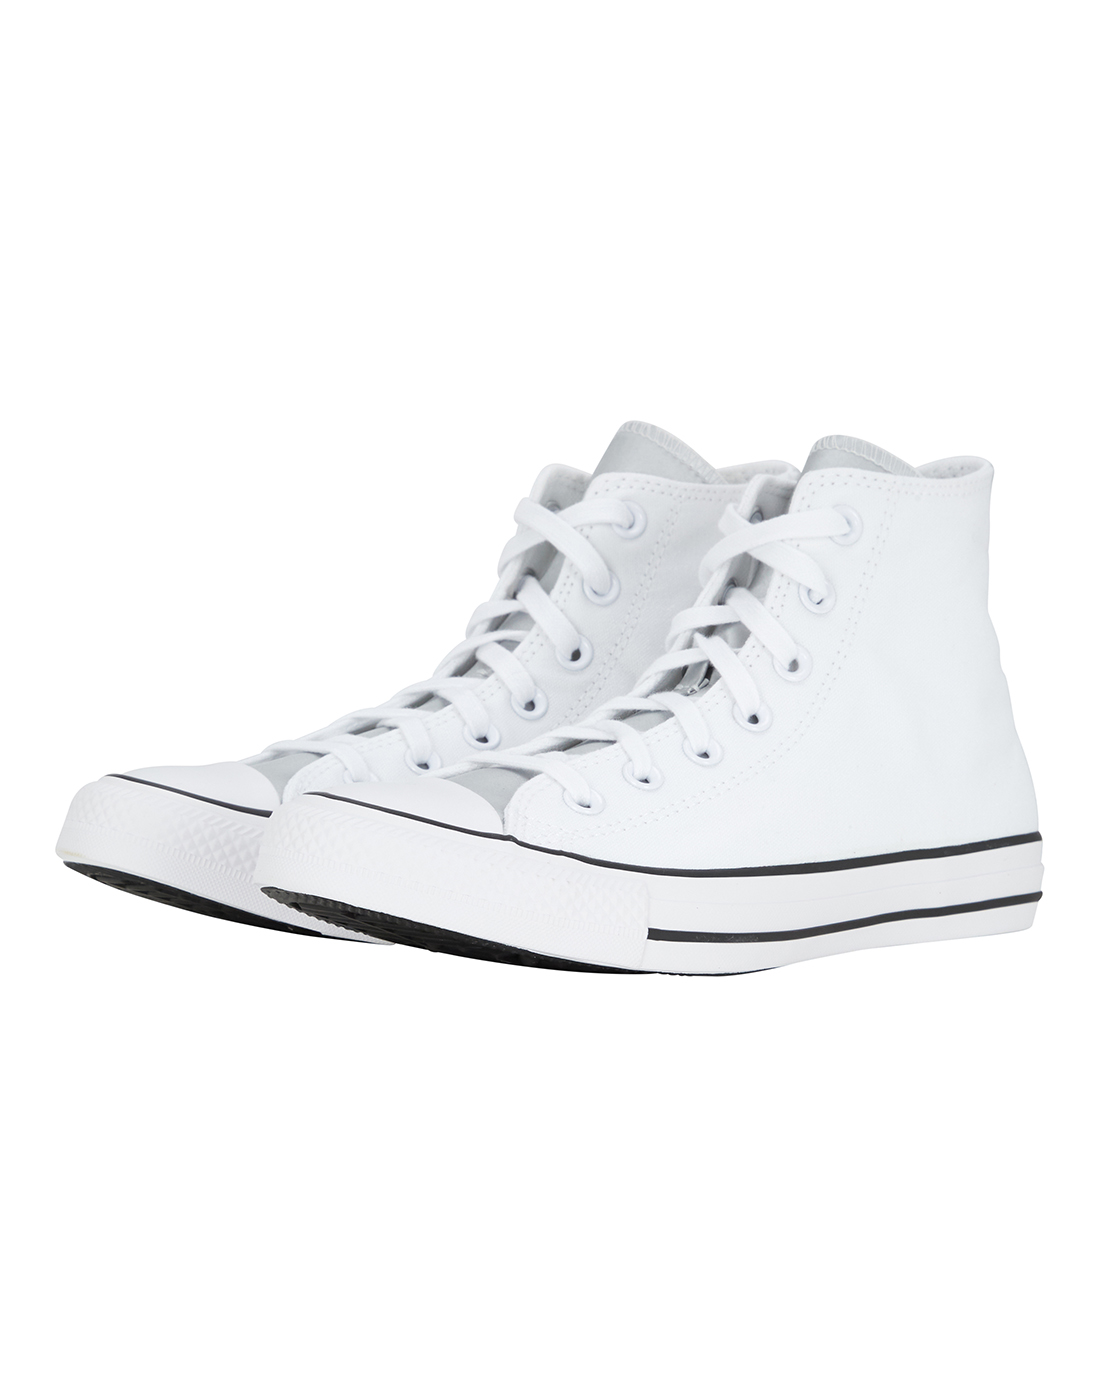 Converse Womens Chuck Taylor All Star Hi - White | Life Style Sports UK